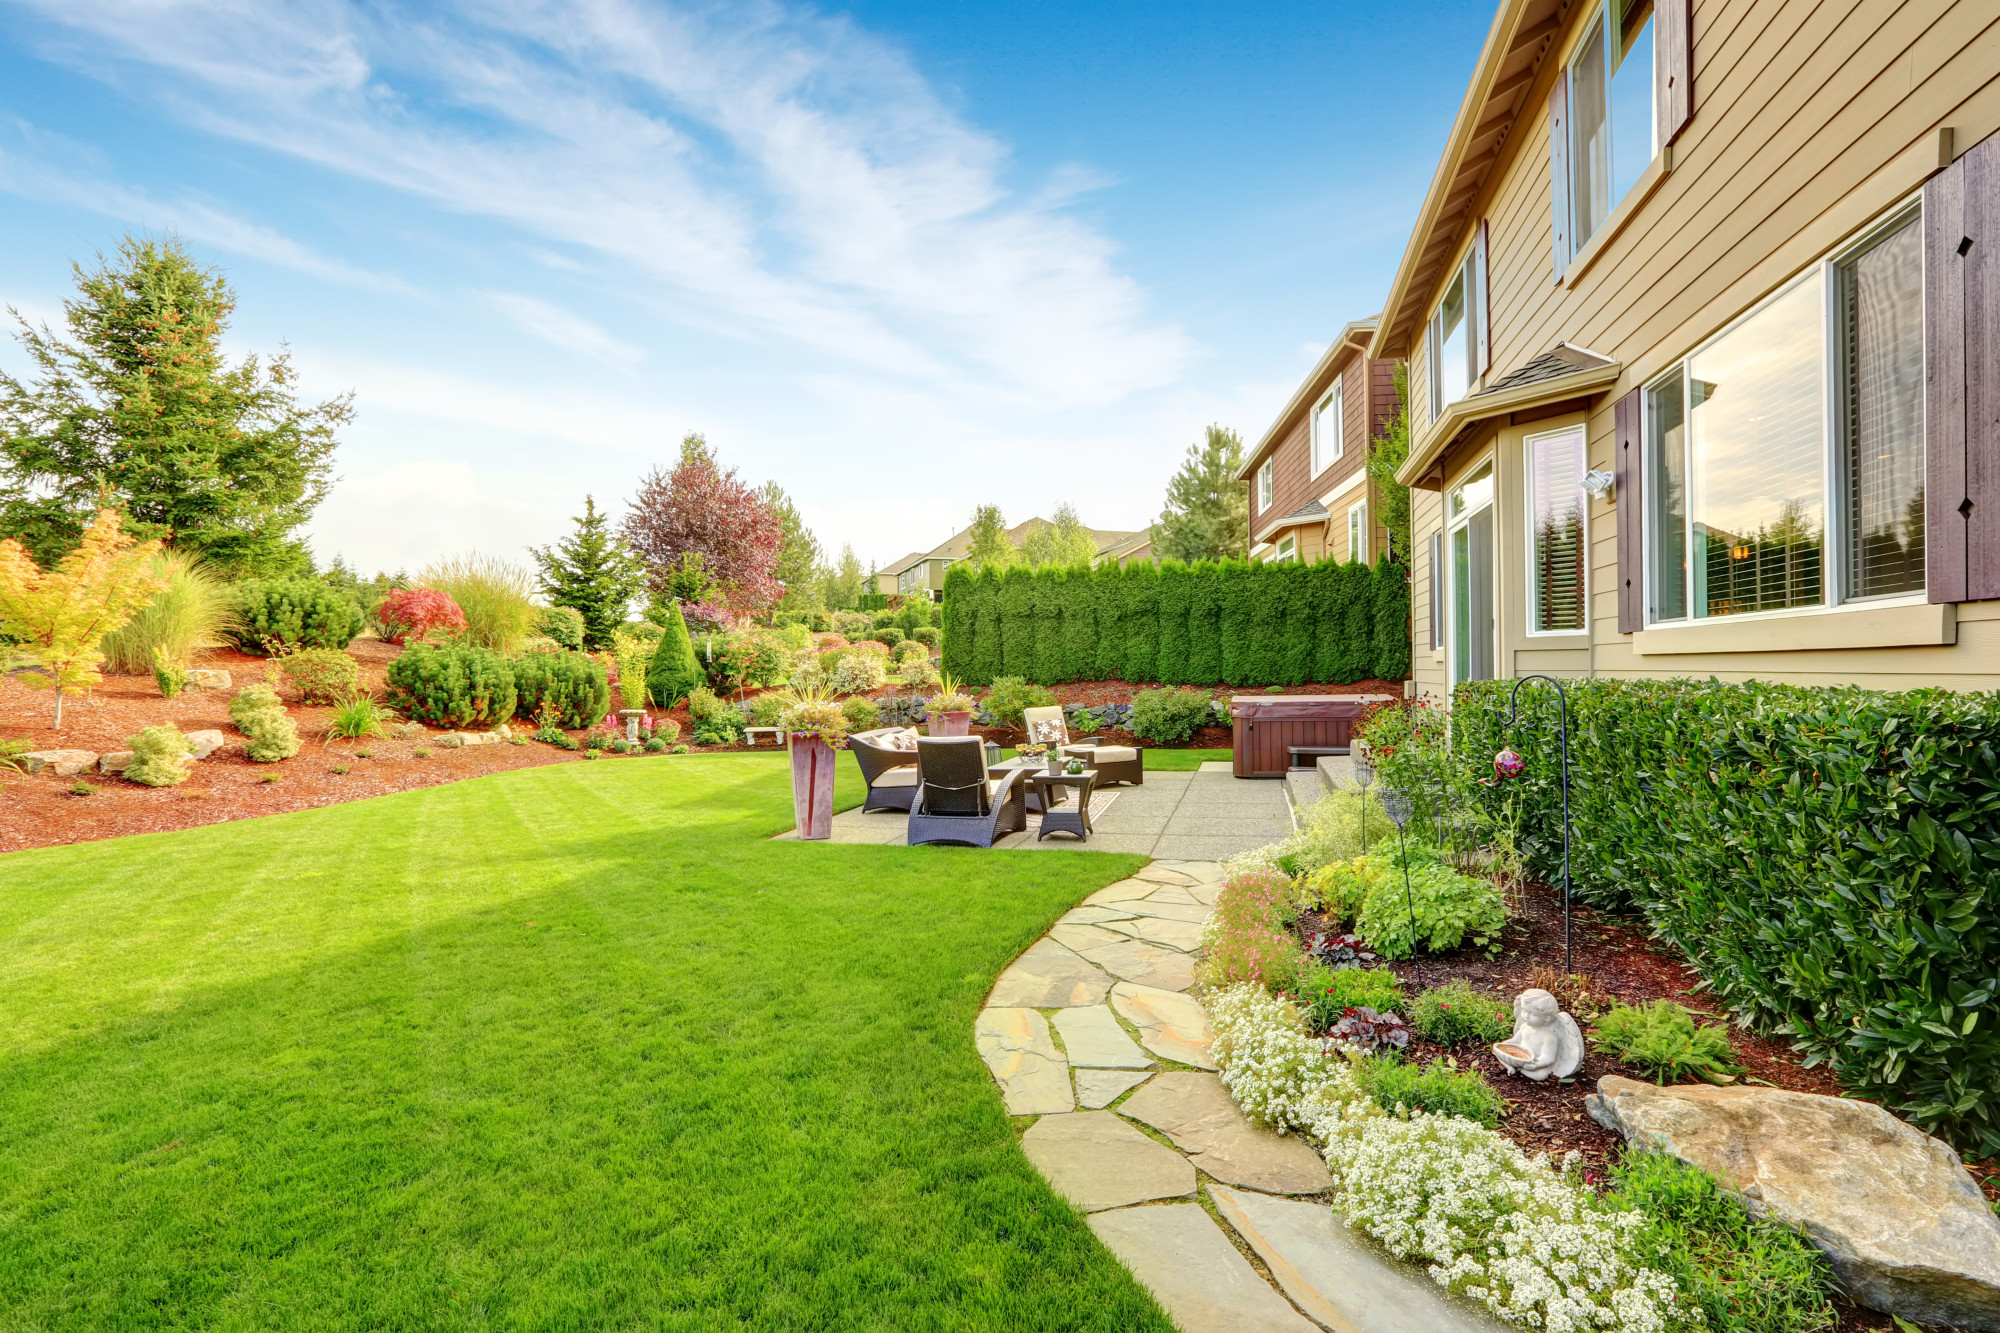 Having a beautiful backyard space can really increase the value of your home. Here are some tips on how to design a backyard.